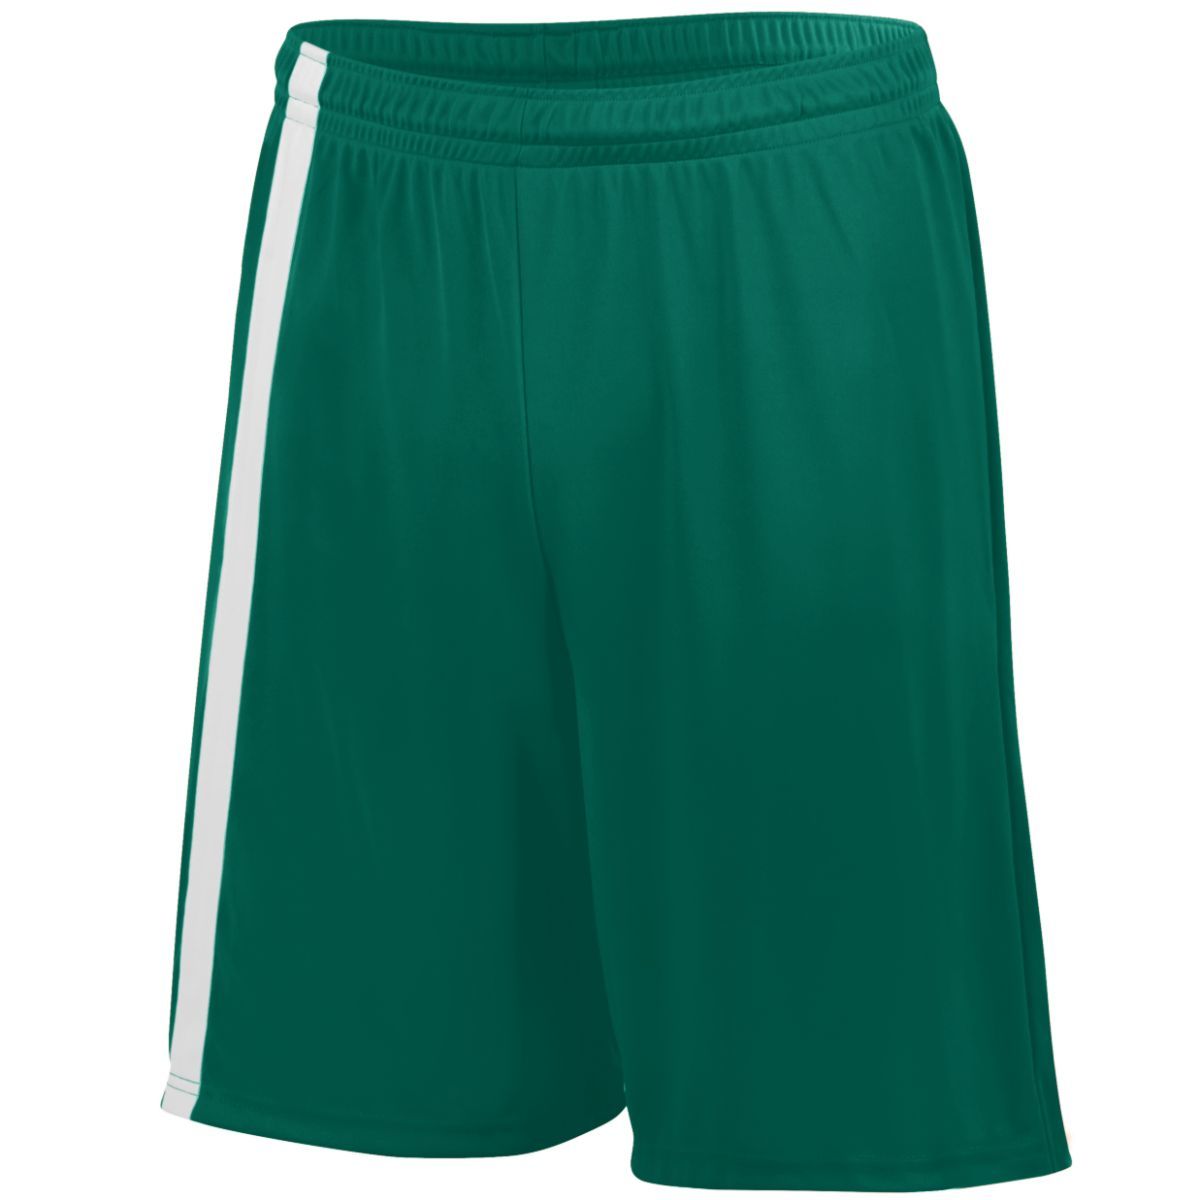 Augusta Sportswear Attacking Third Shorts in Dark Green/White  -Part of the Adult, Adult-Shorts, Augusta-Products, Soccer, All-Sports-1 product lines at KanaleyCreations.com